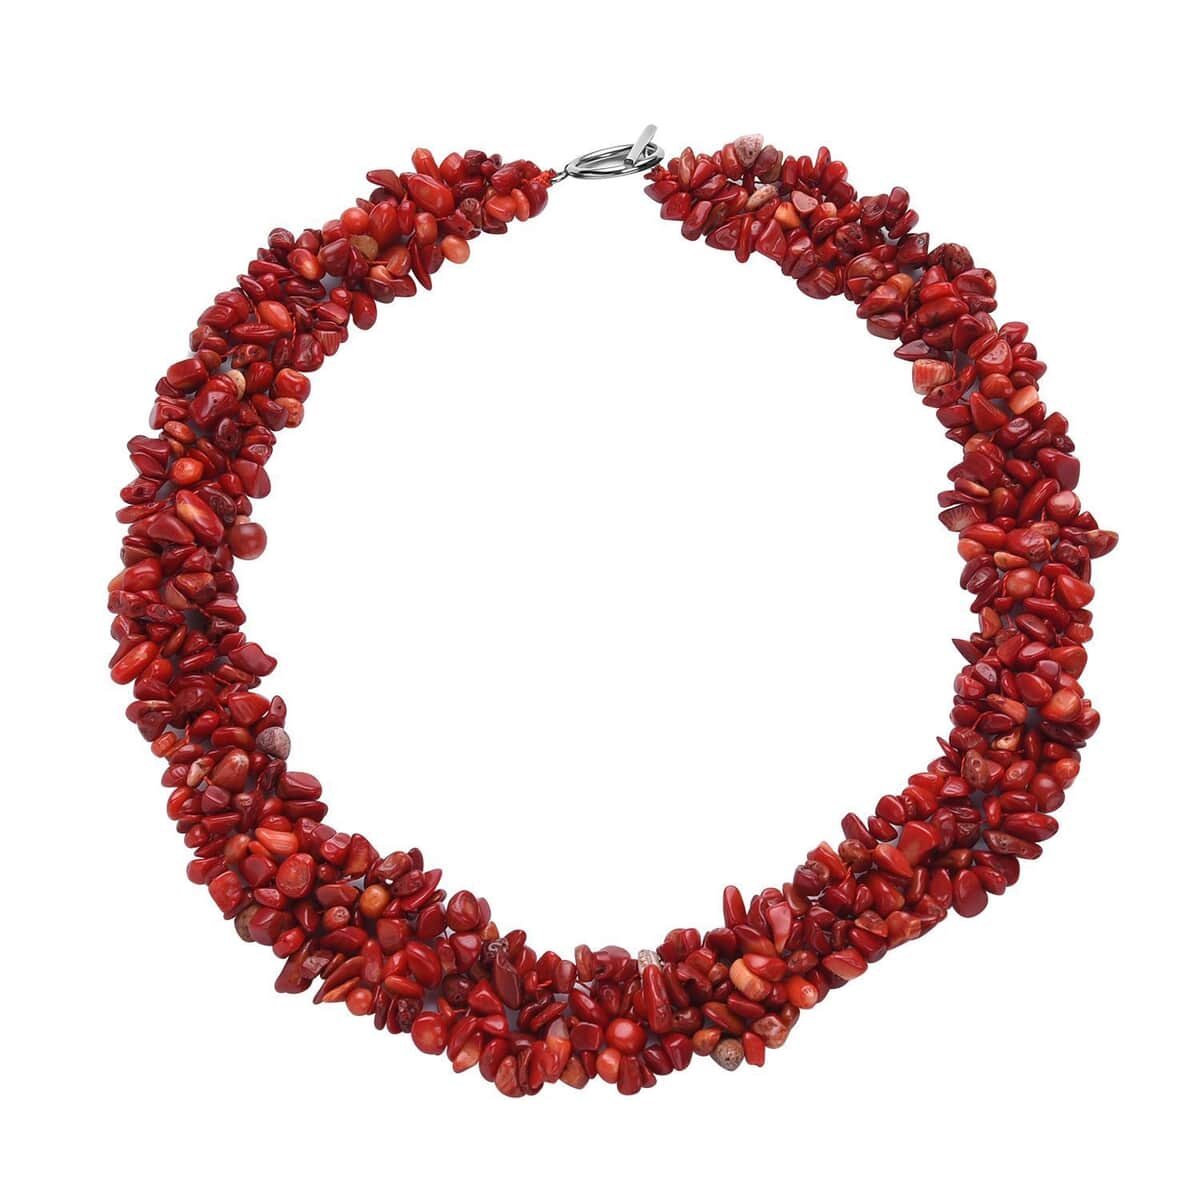 Bamboo Coral Chips Stretch Bracelet and Earrings and Toggle Clasp Necklace in Black Oxidized Stainless Steel (18.00 In) image number 2